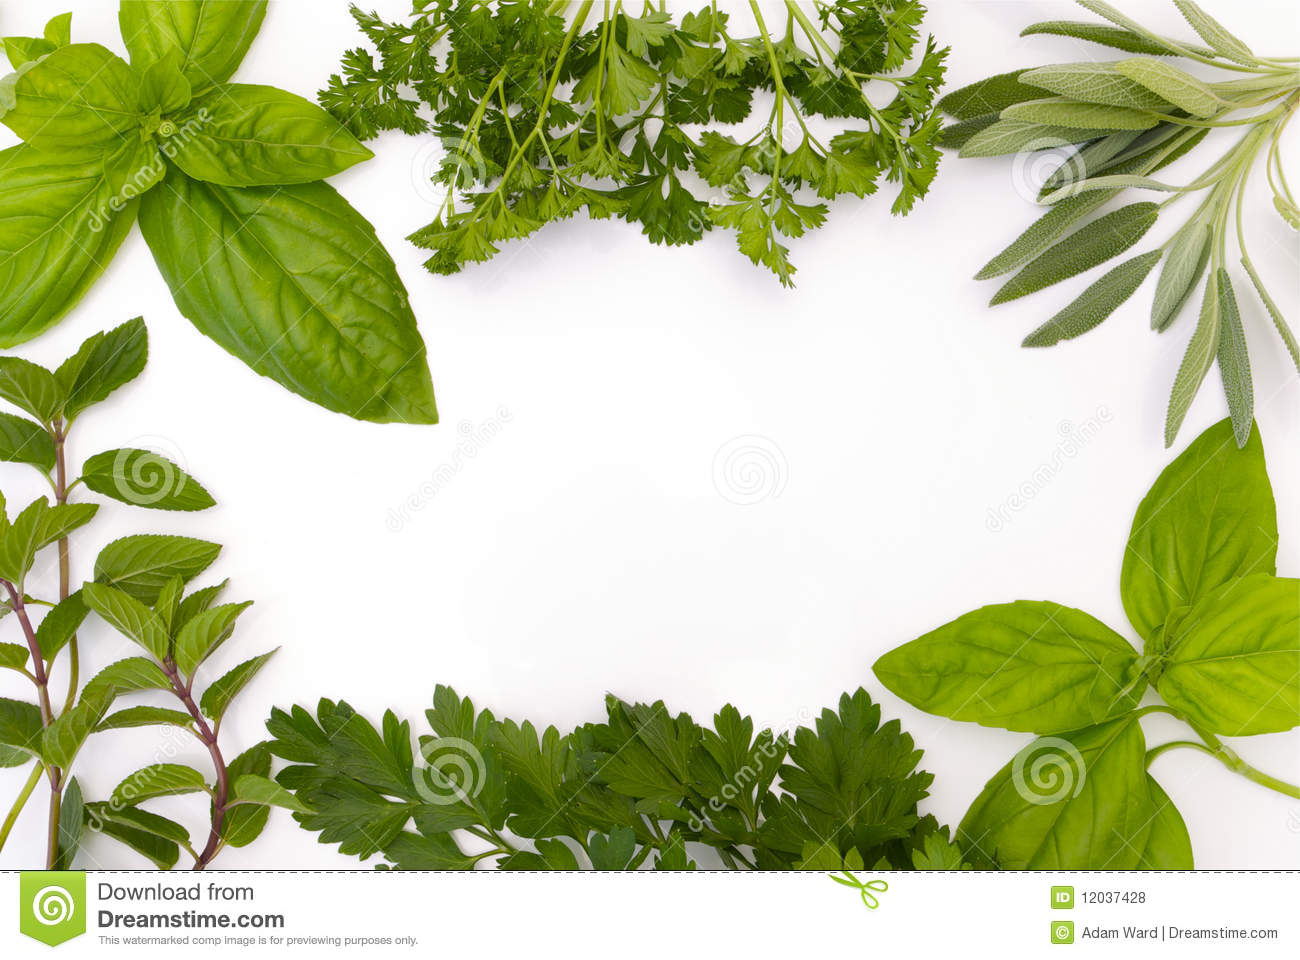 Various Herbs In A Border On White Background